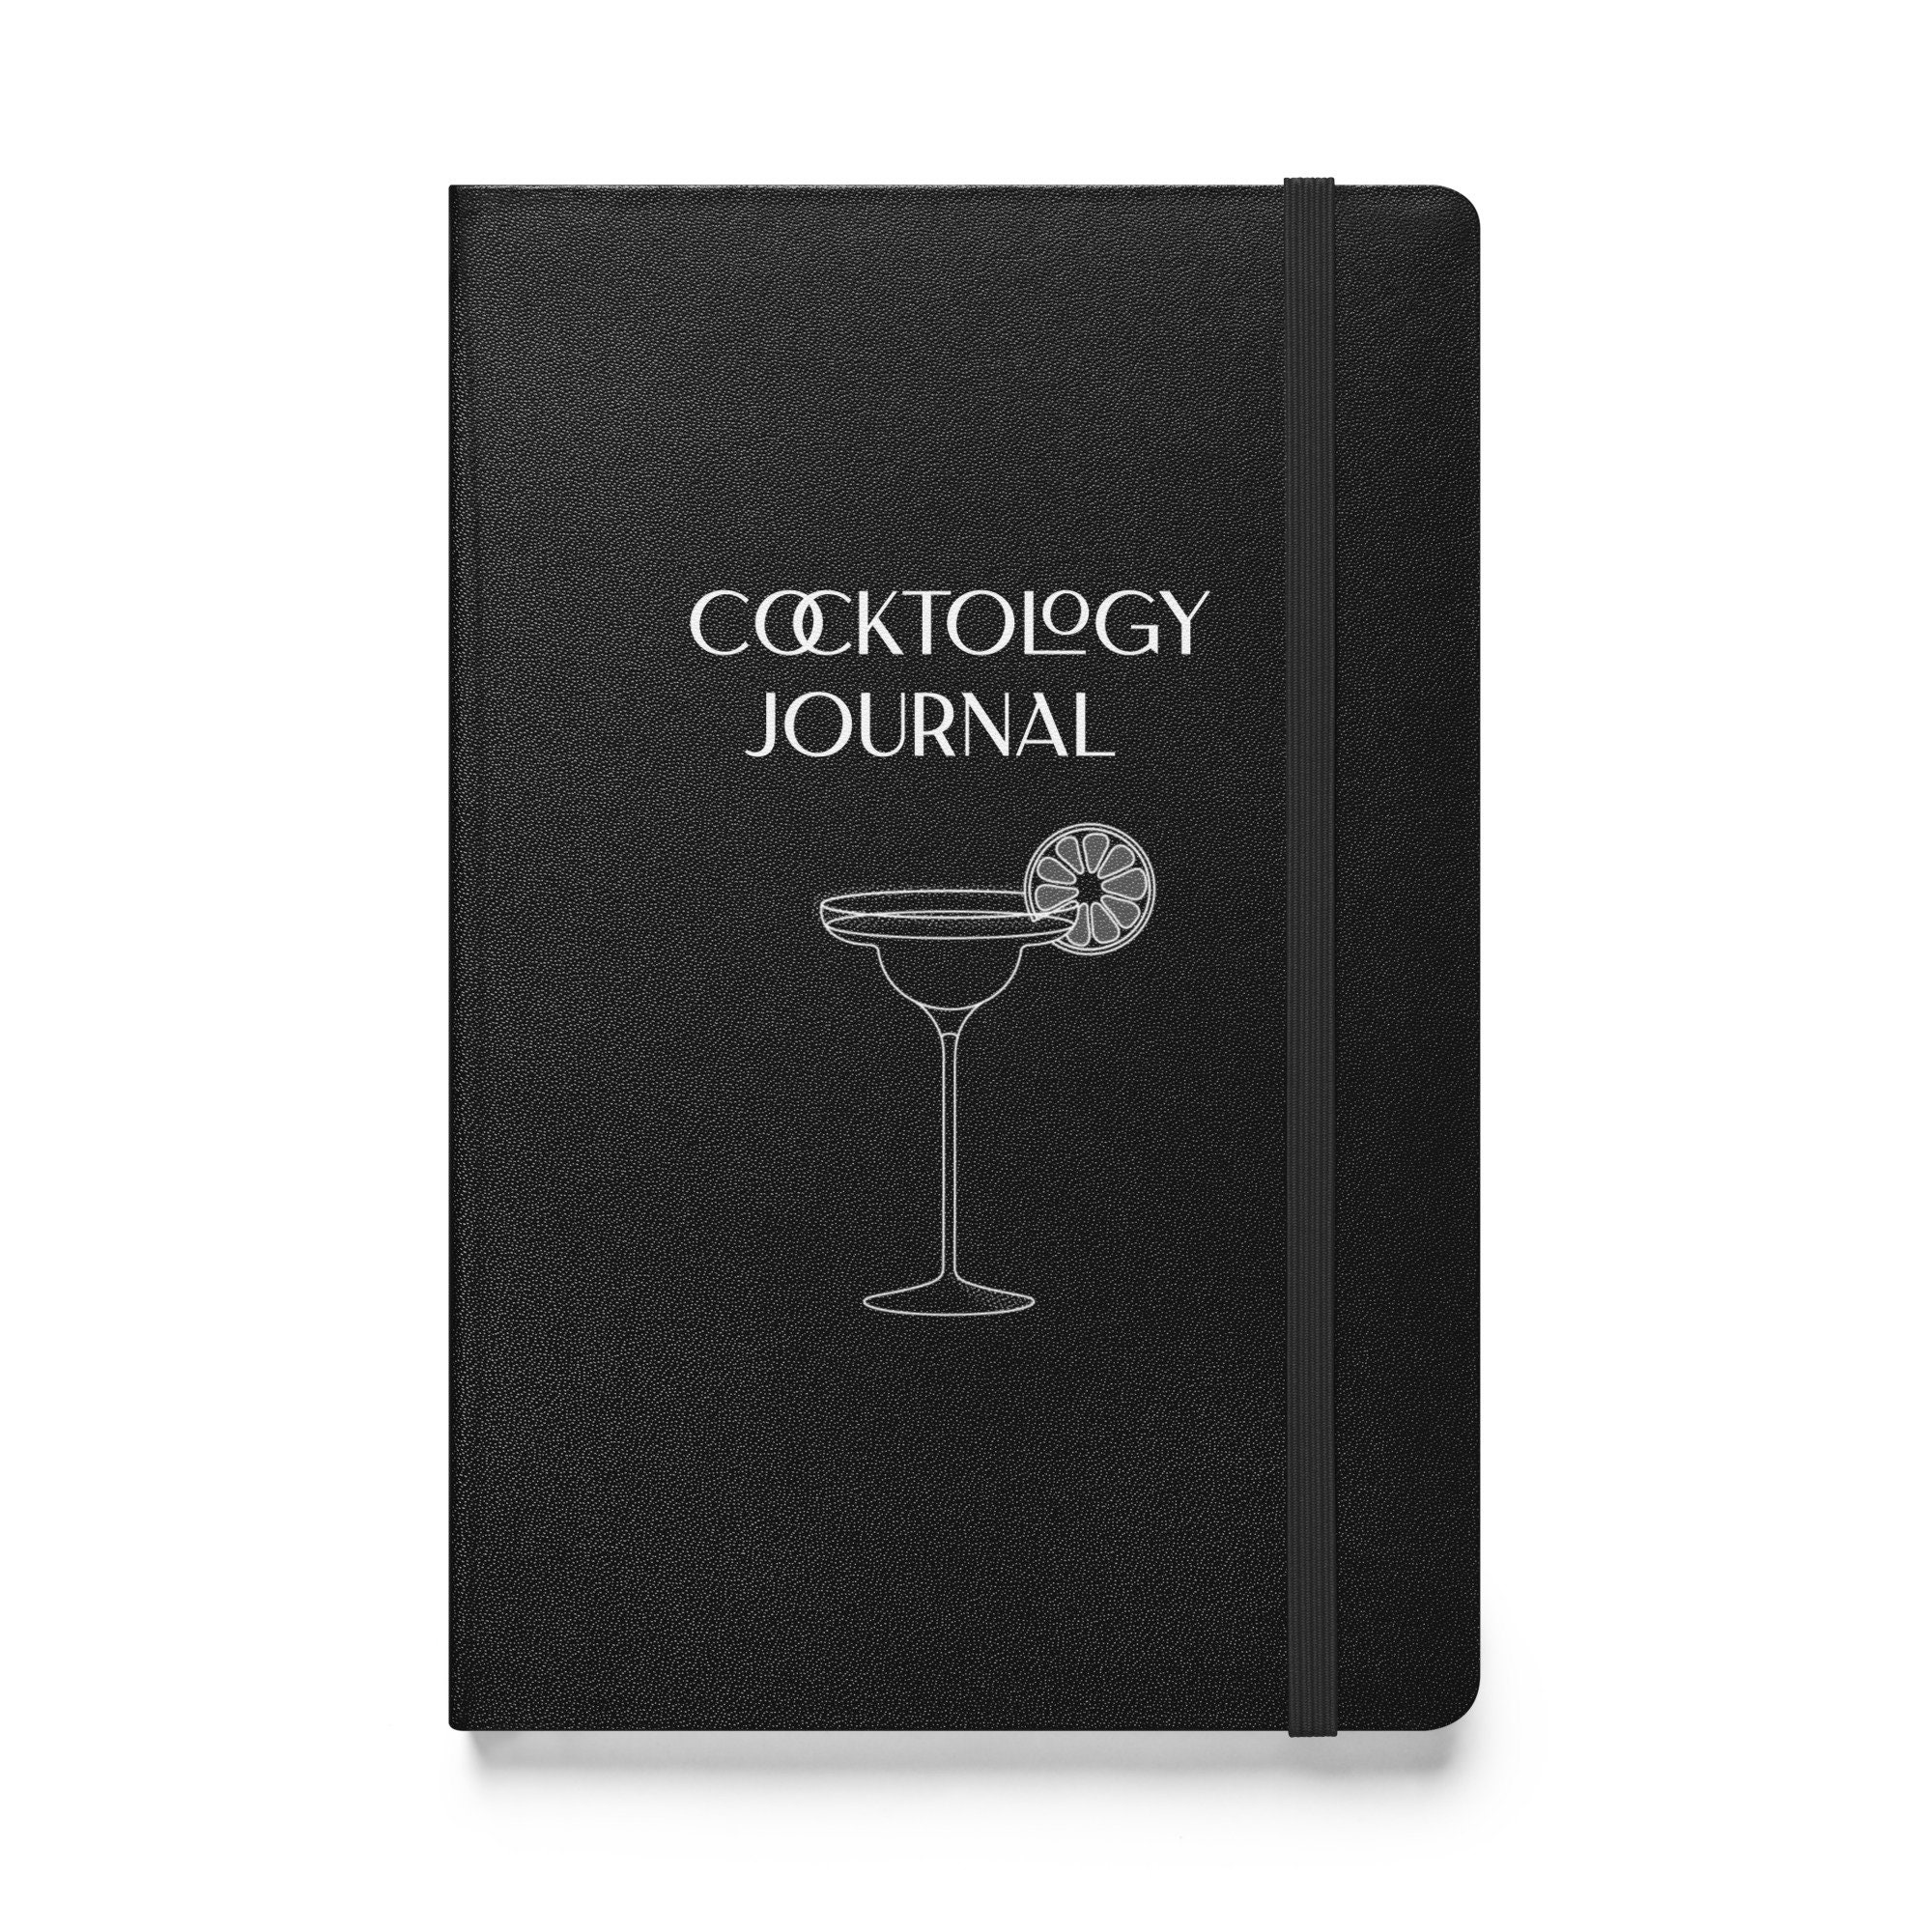 Cocktail Recipes: Blank Mixed Drink Organizer Notebook Journal